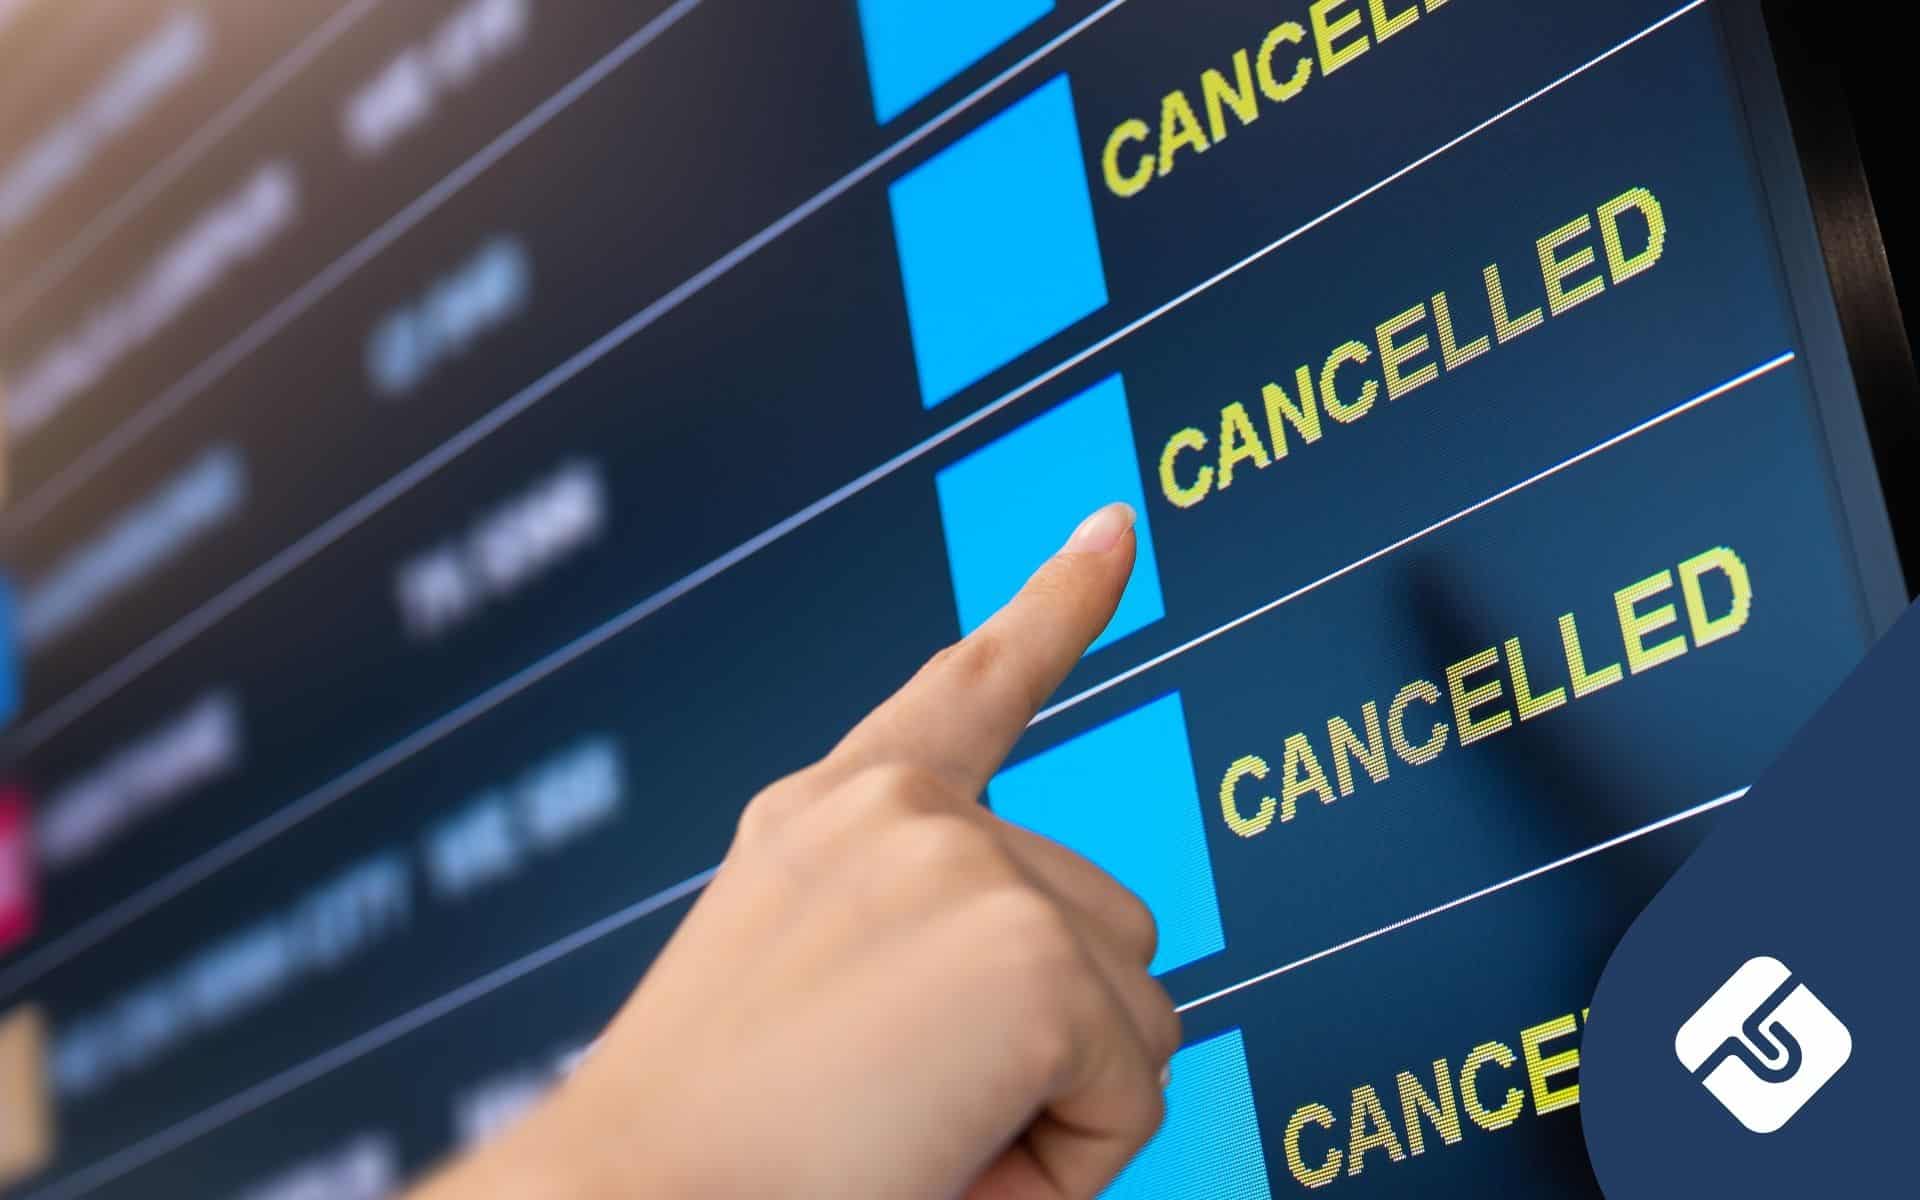 How Should My Business Handle Cancellations Due to COVID-19?